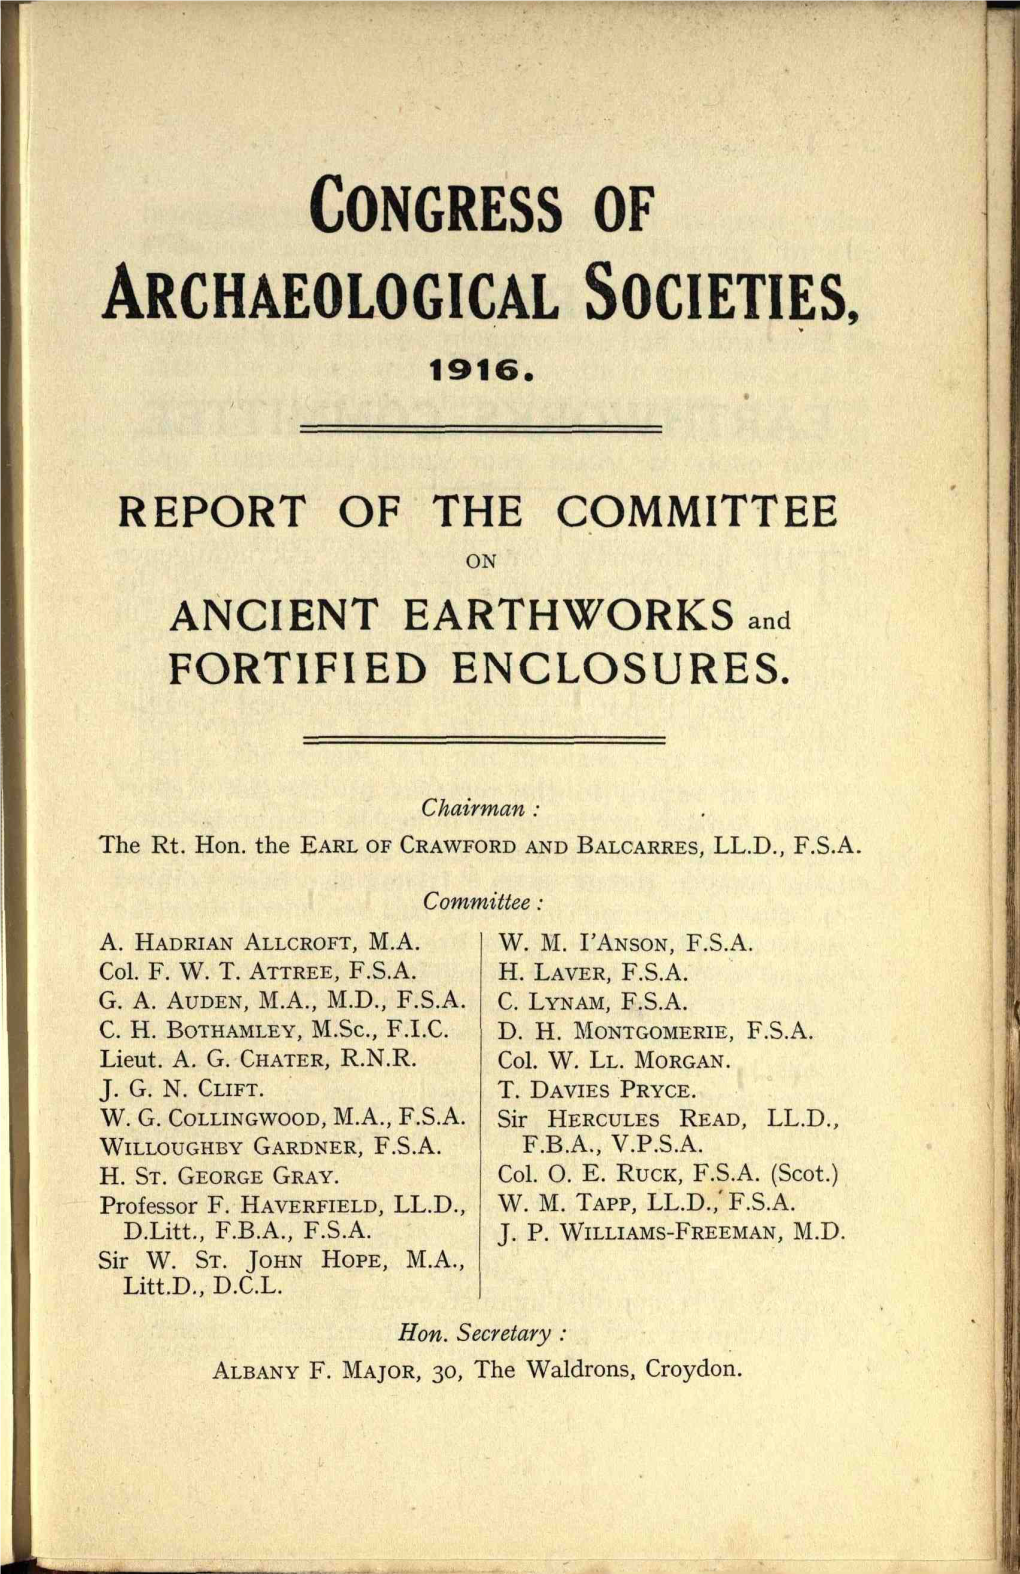 Congress of Archaeological Societies, 1916